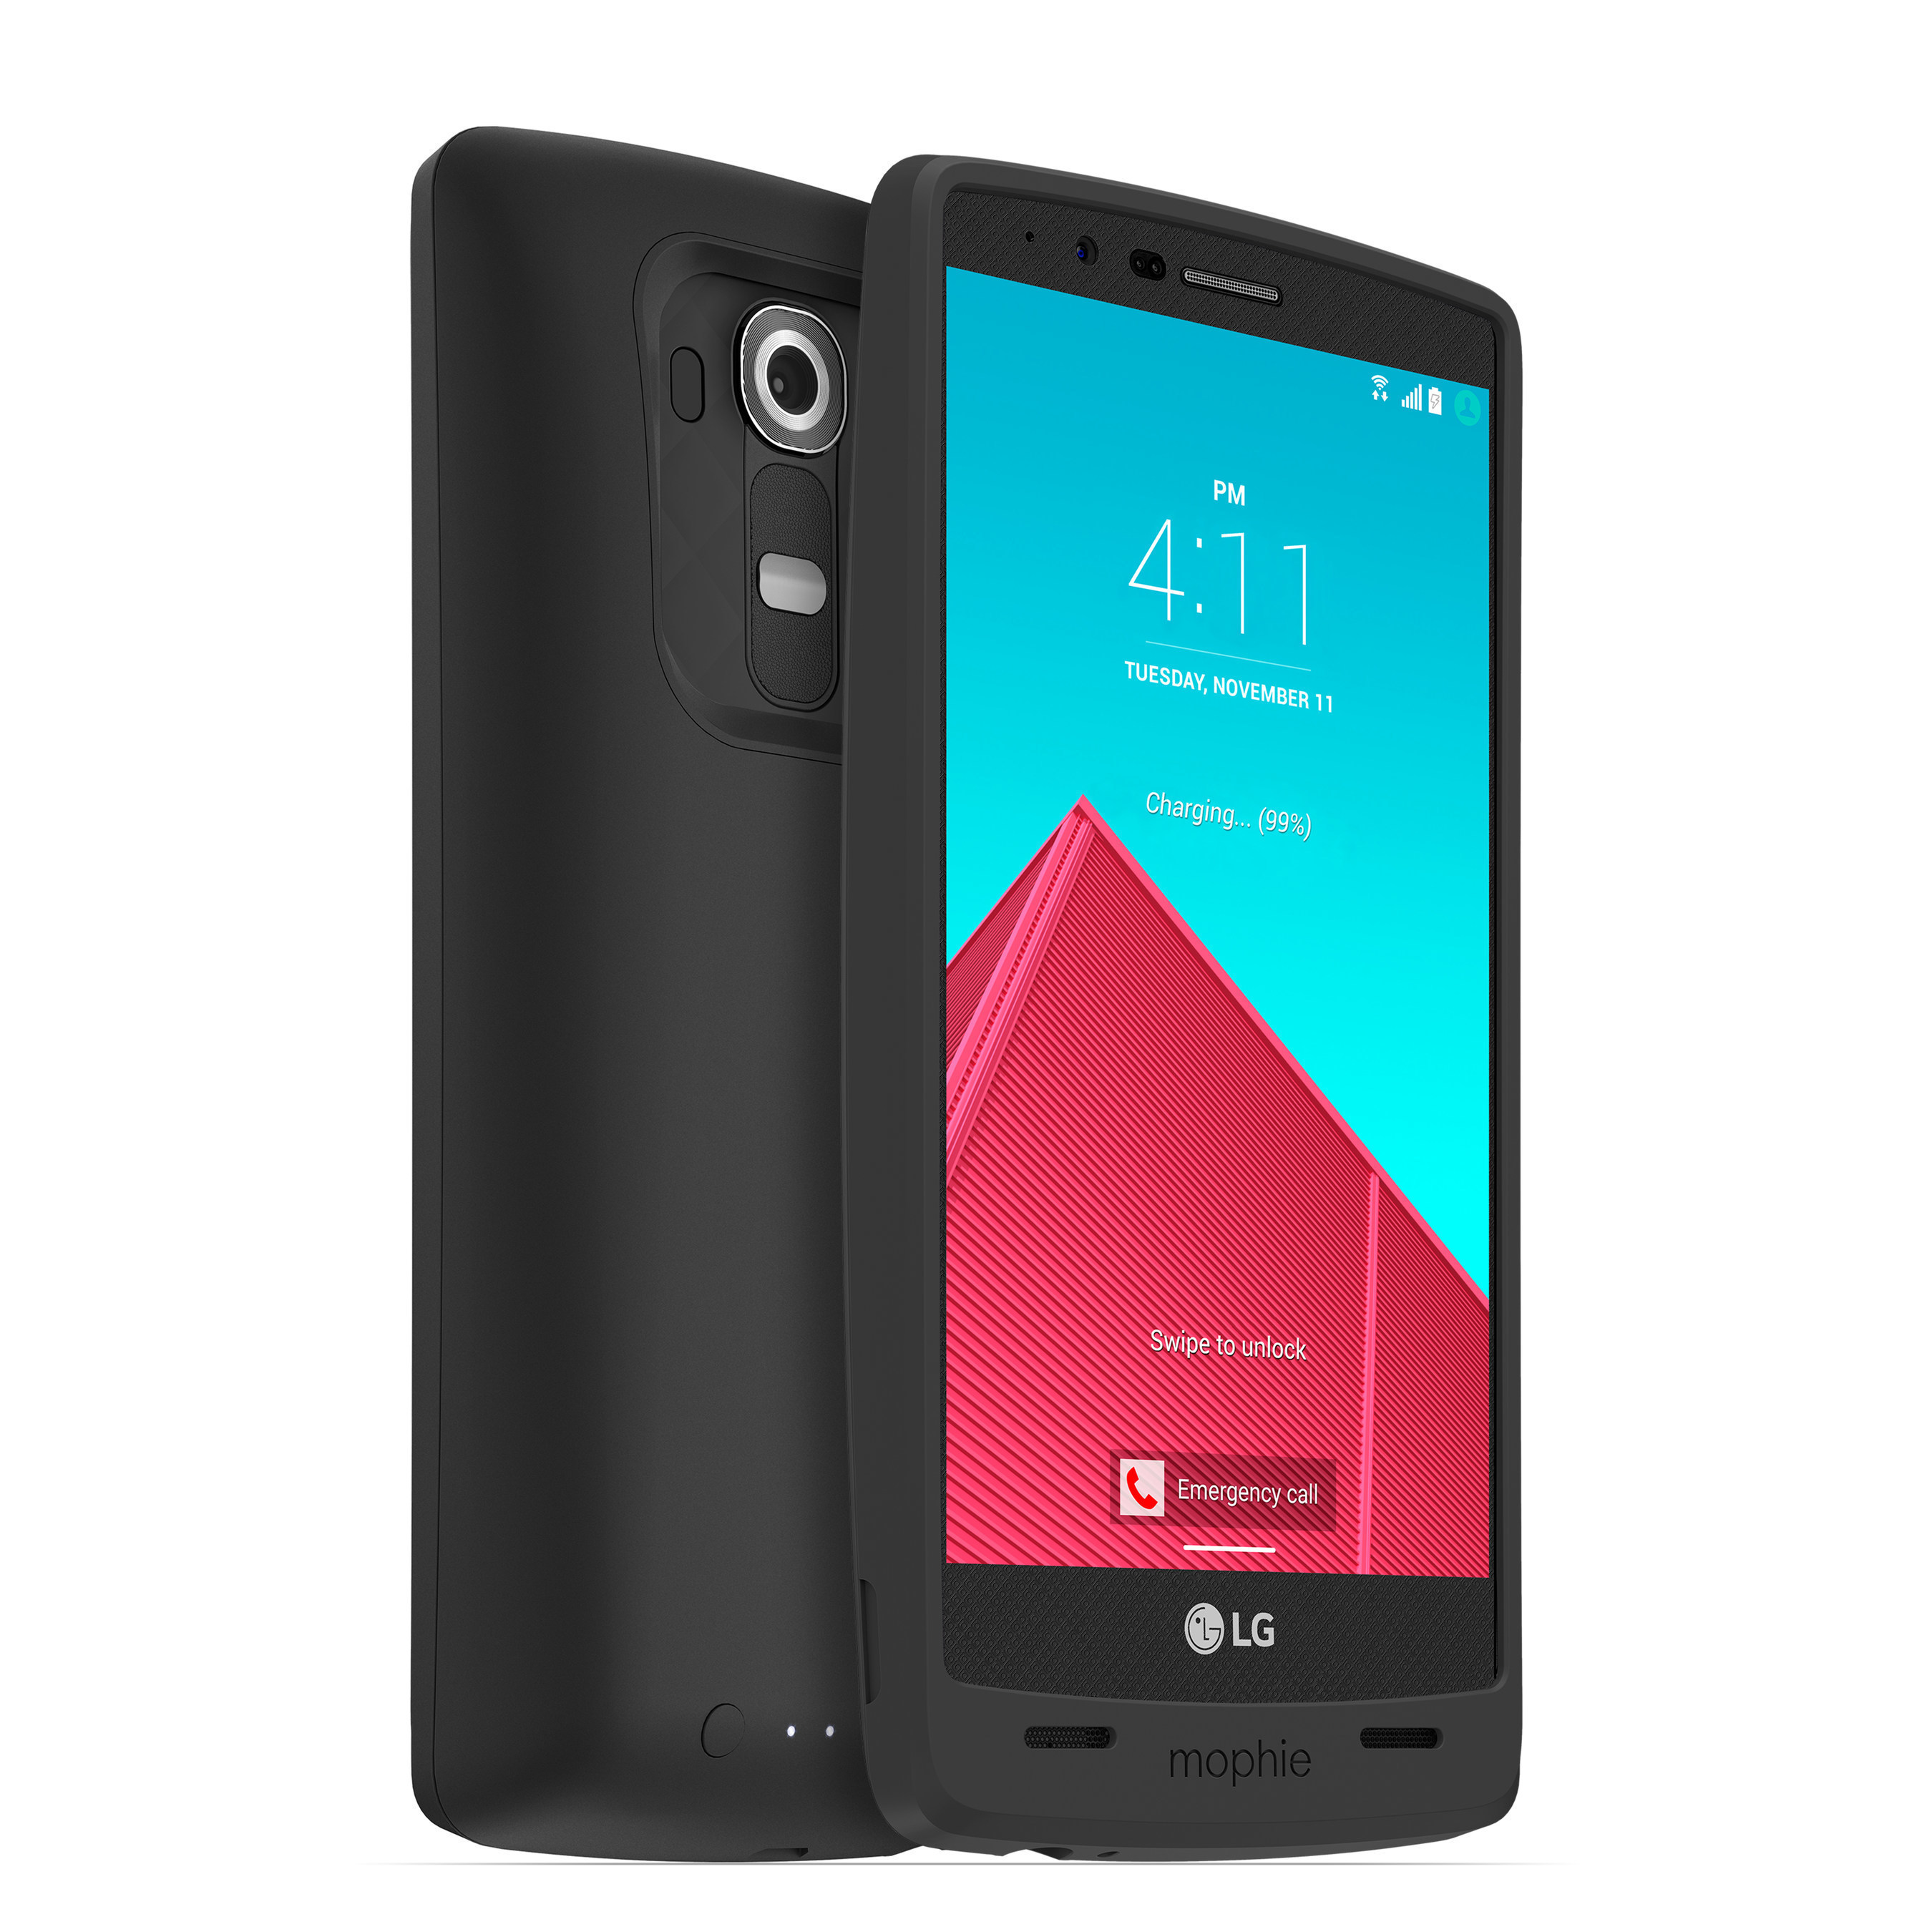 mophie juice pack made for LG G4